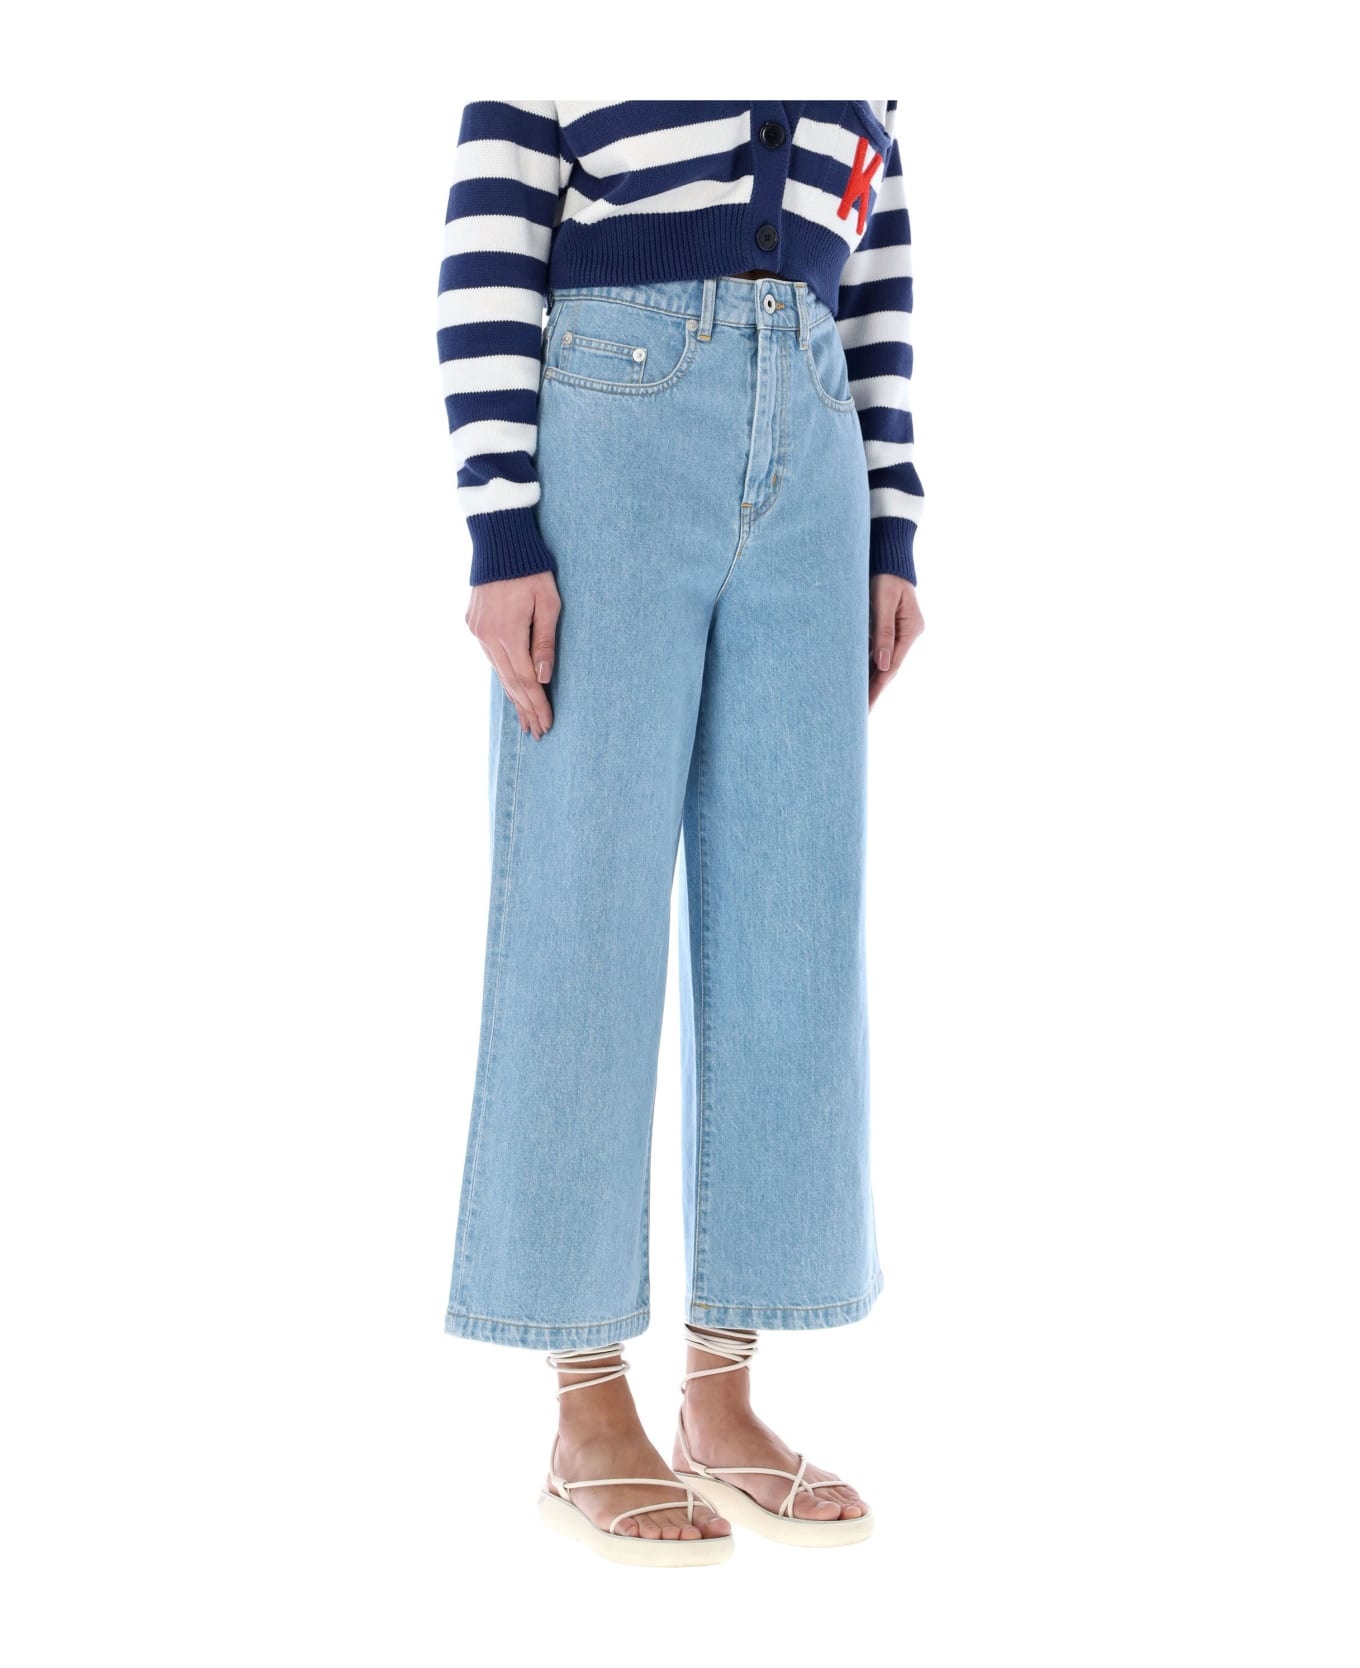 Sumire Cropped Jeans - 2